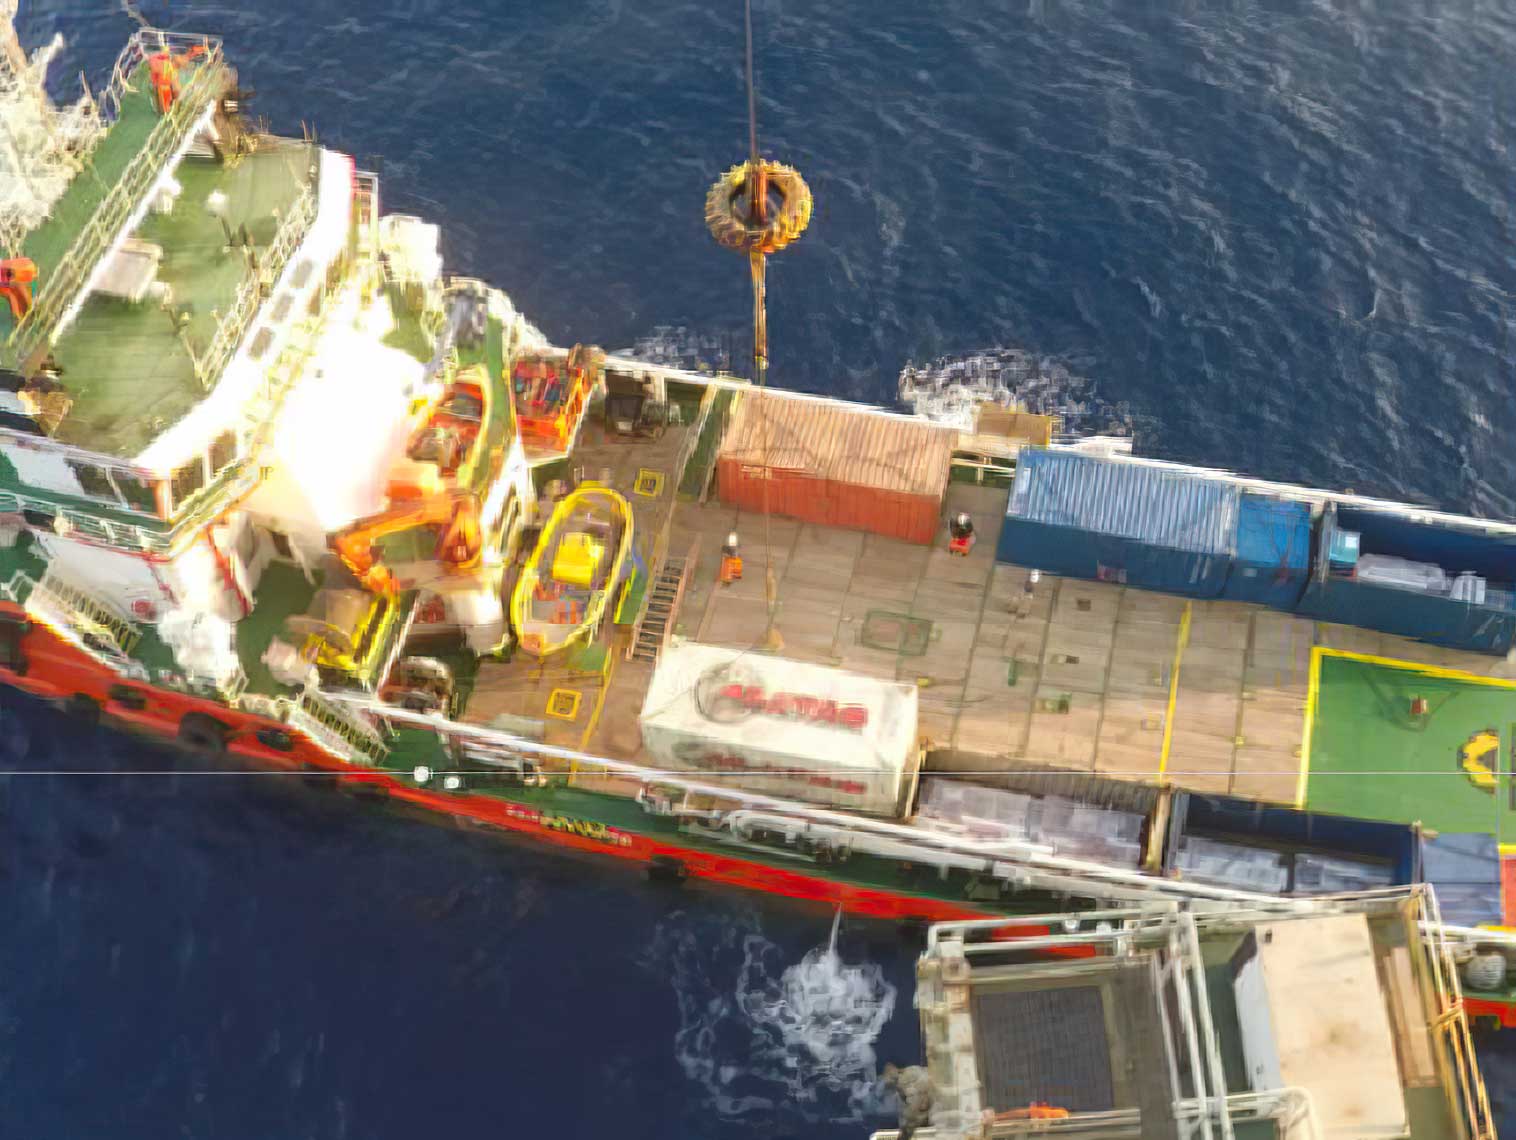 Thanks to the DNV 2.7 1 certification the container can be lifted offshore